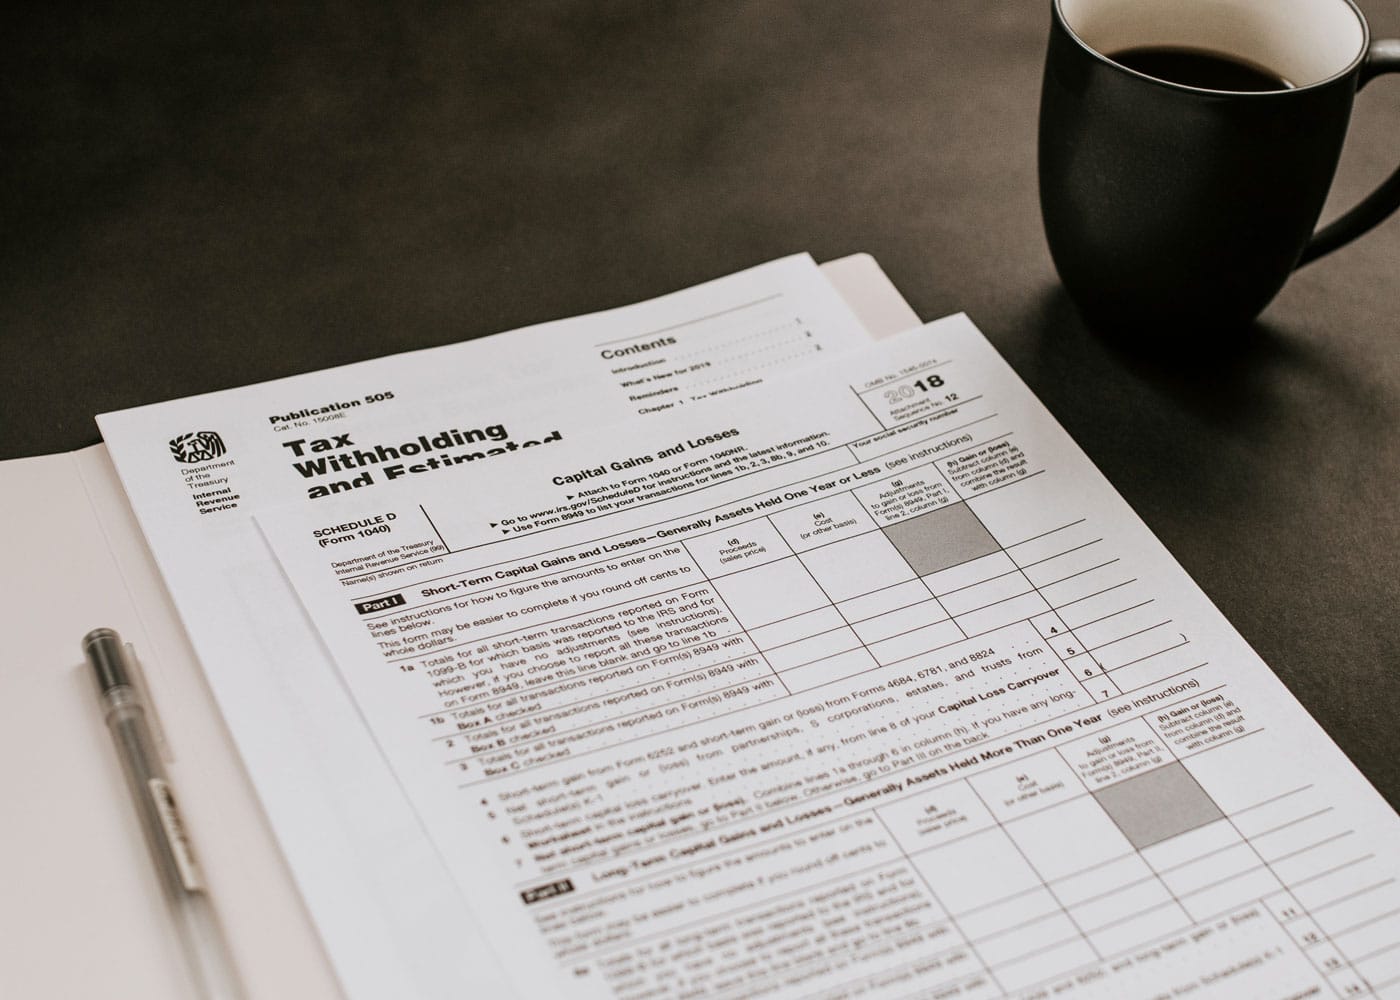 A folder with tax withholding documents, sitting next to a black coffee mug with black coffee